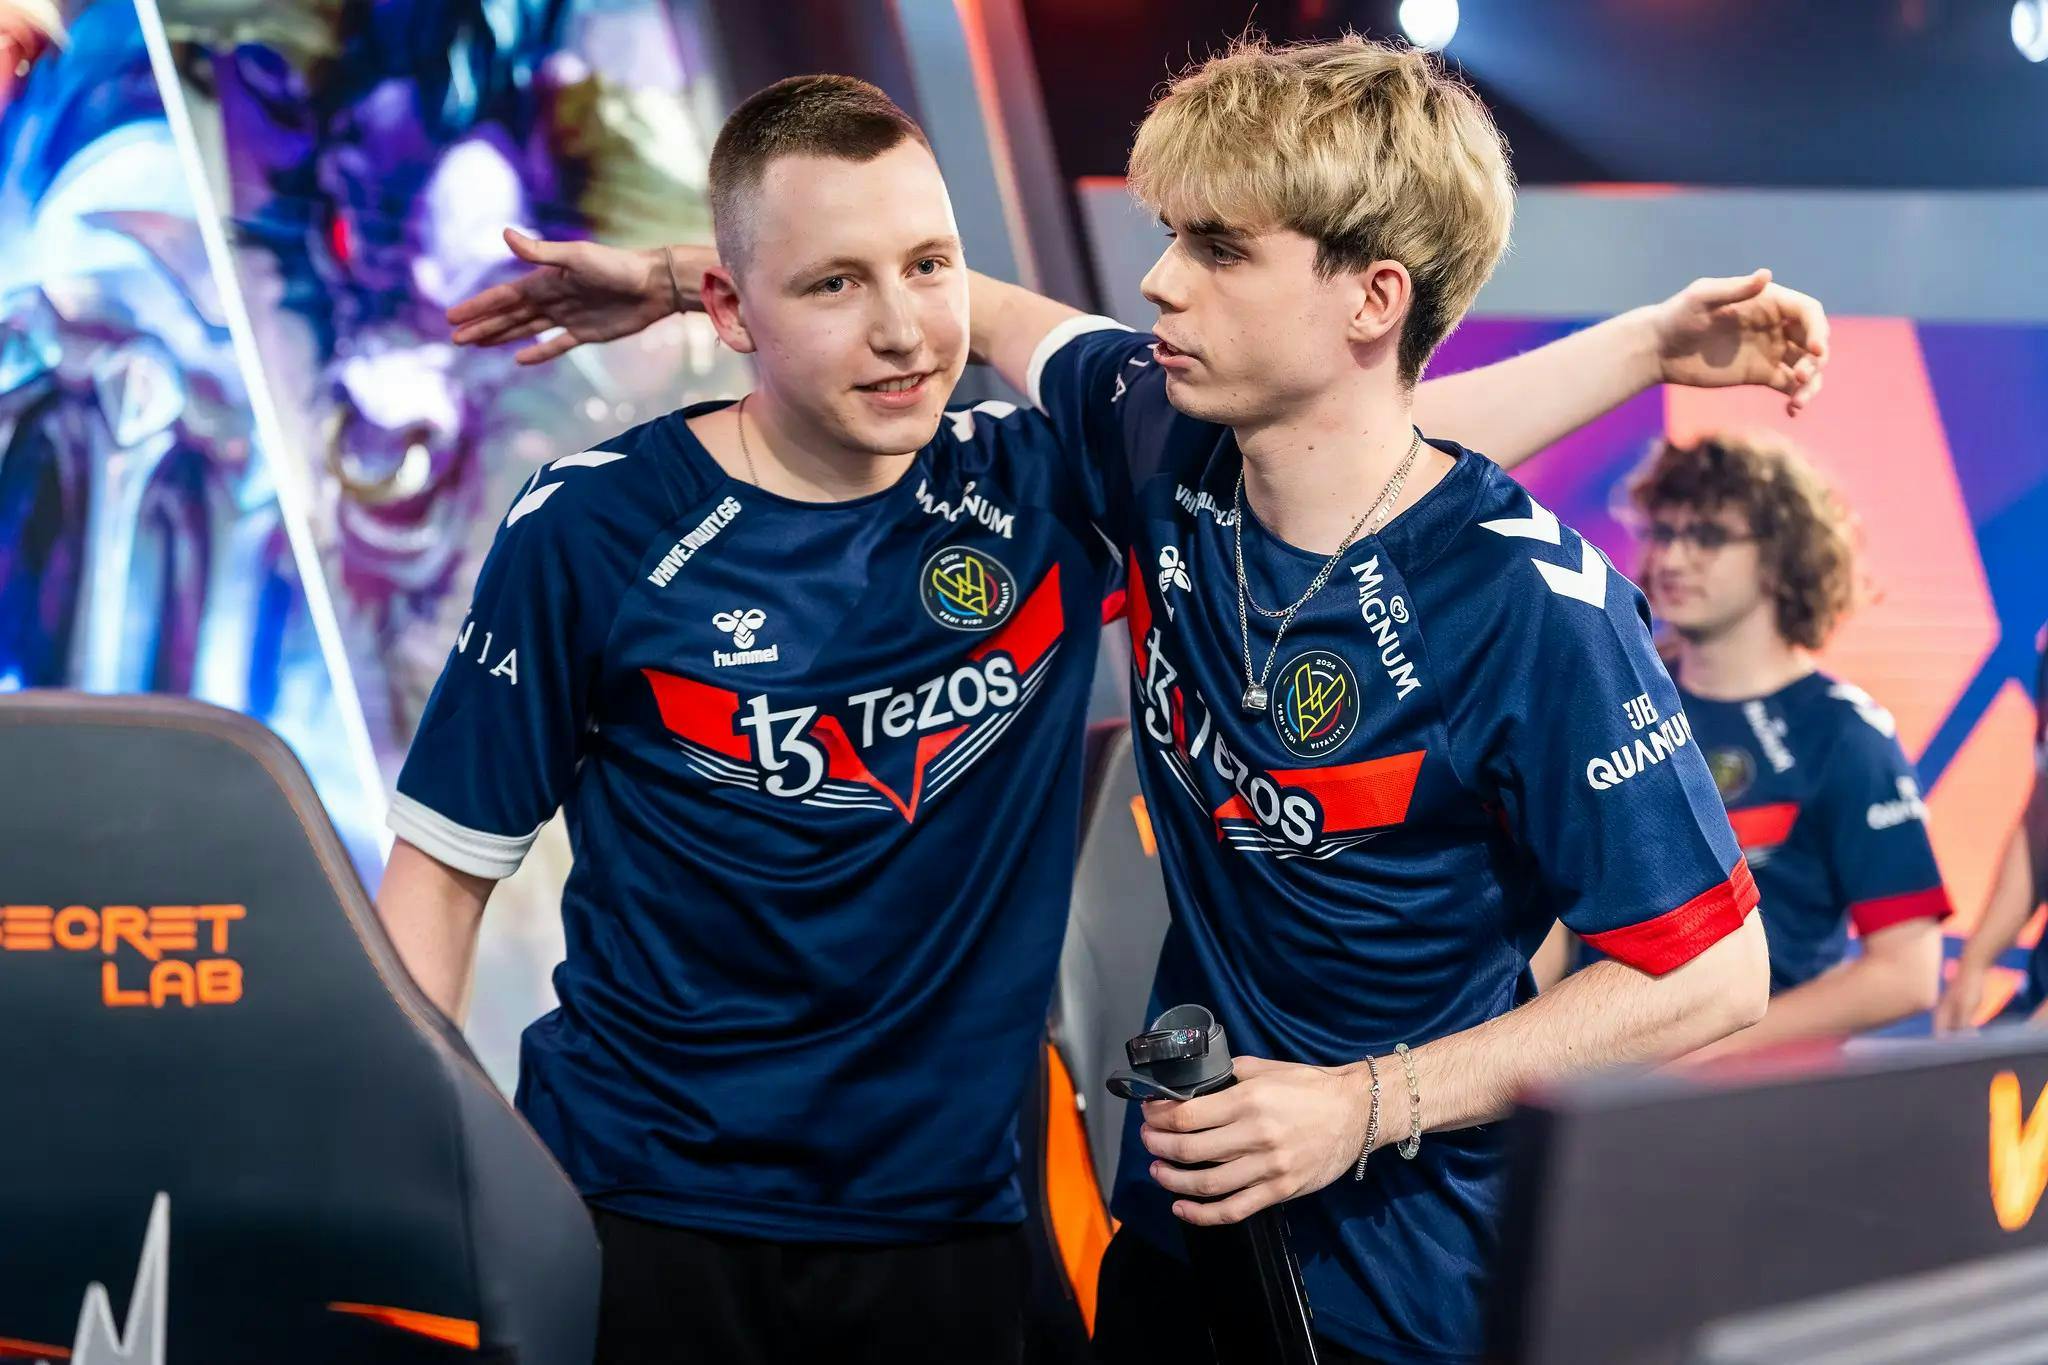 Lyncas and Vetheo after a victory in Week 2 of the LEC. Credit: Wojciech Wandzel/Riot Games